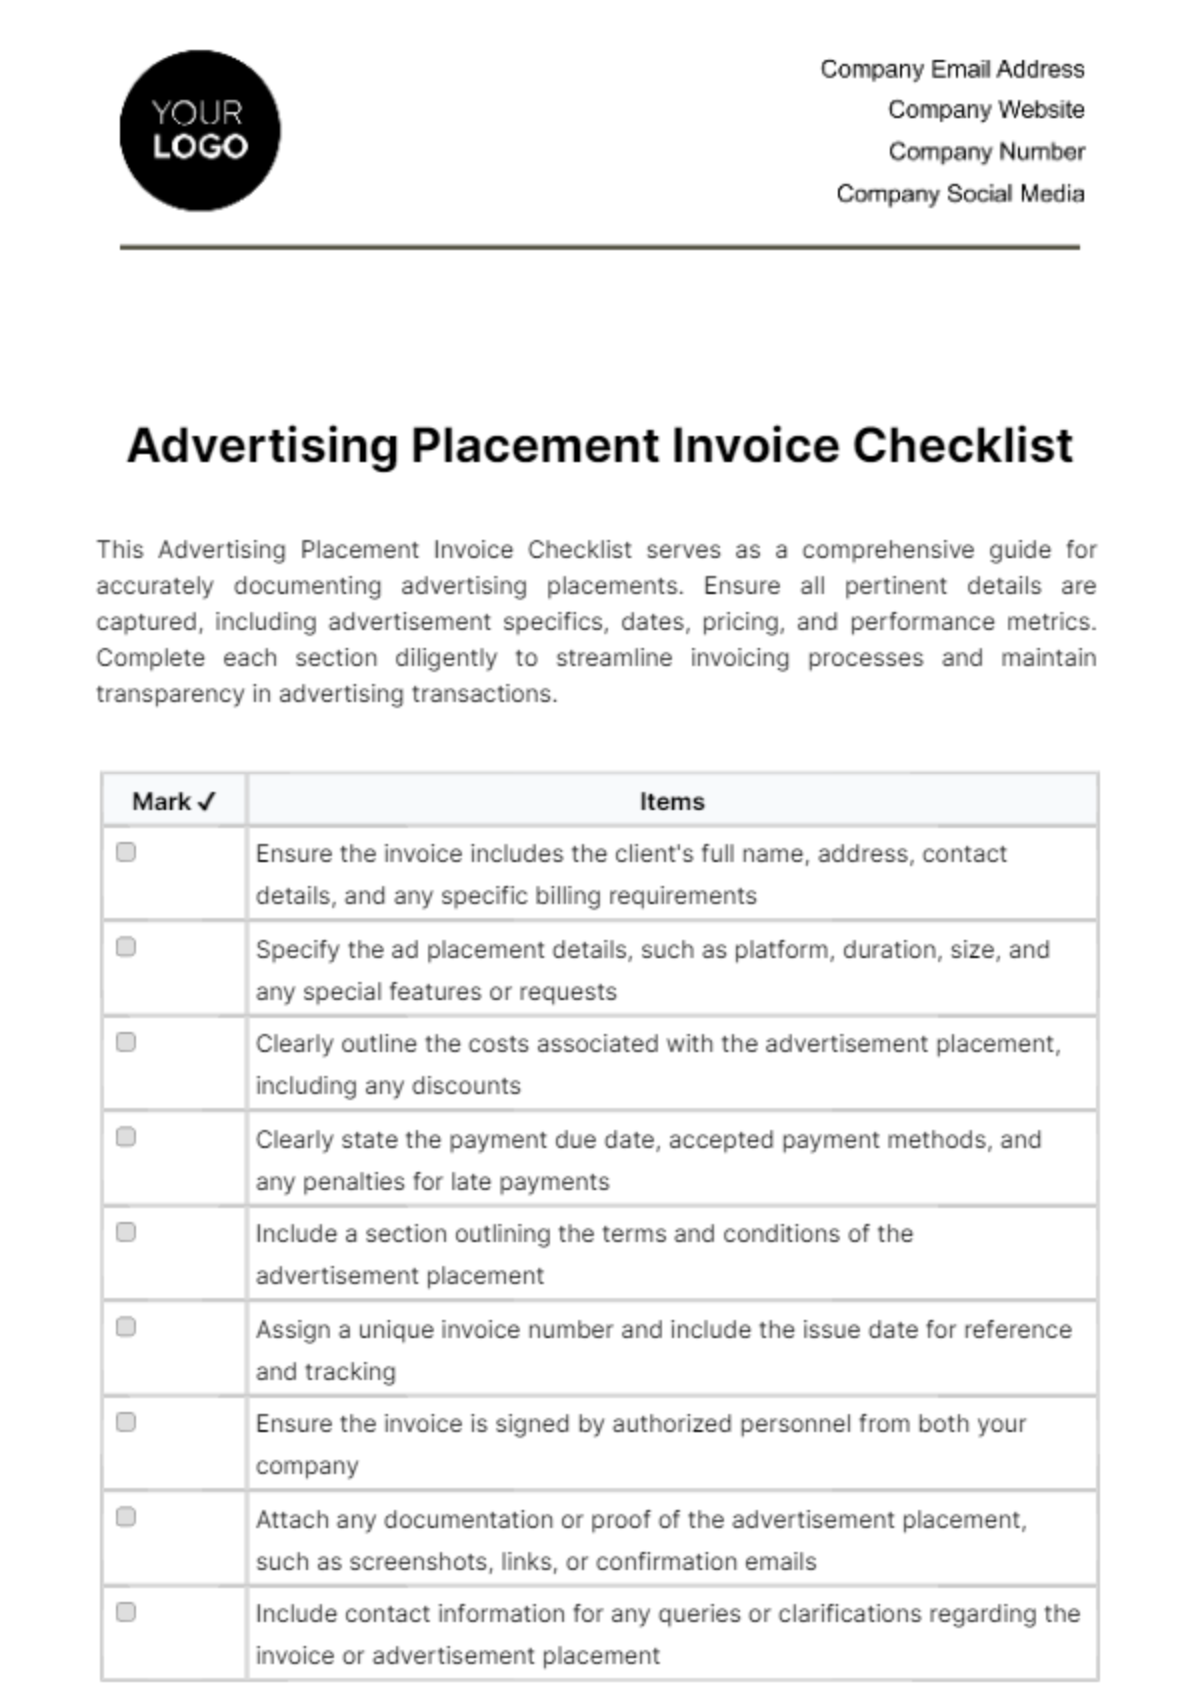 Free Advertising Placement Invoice Checklist Template